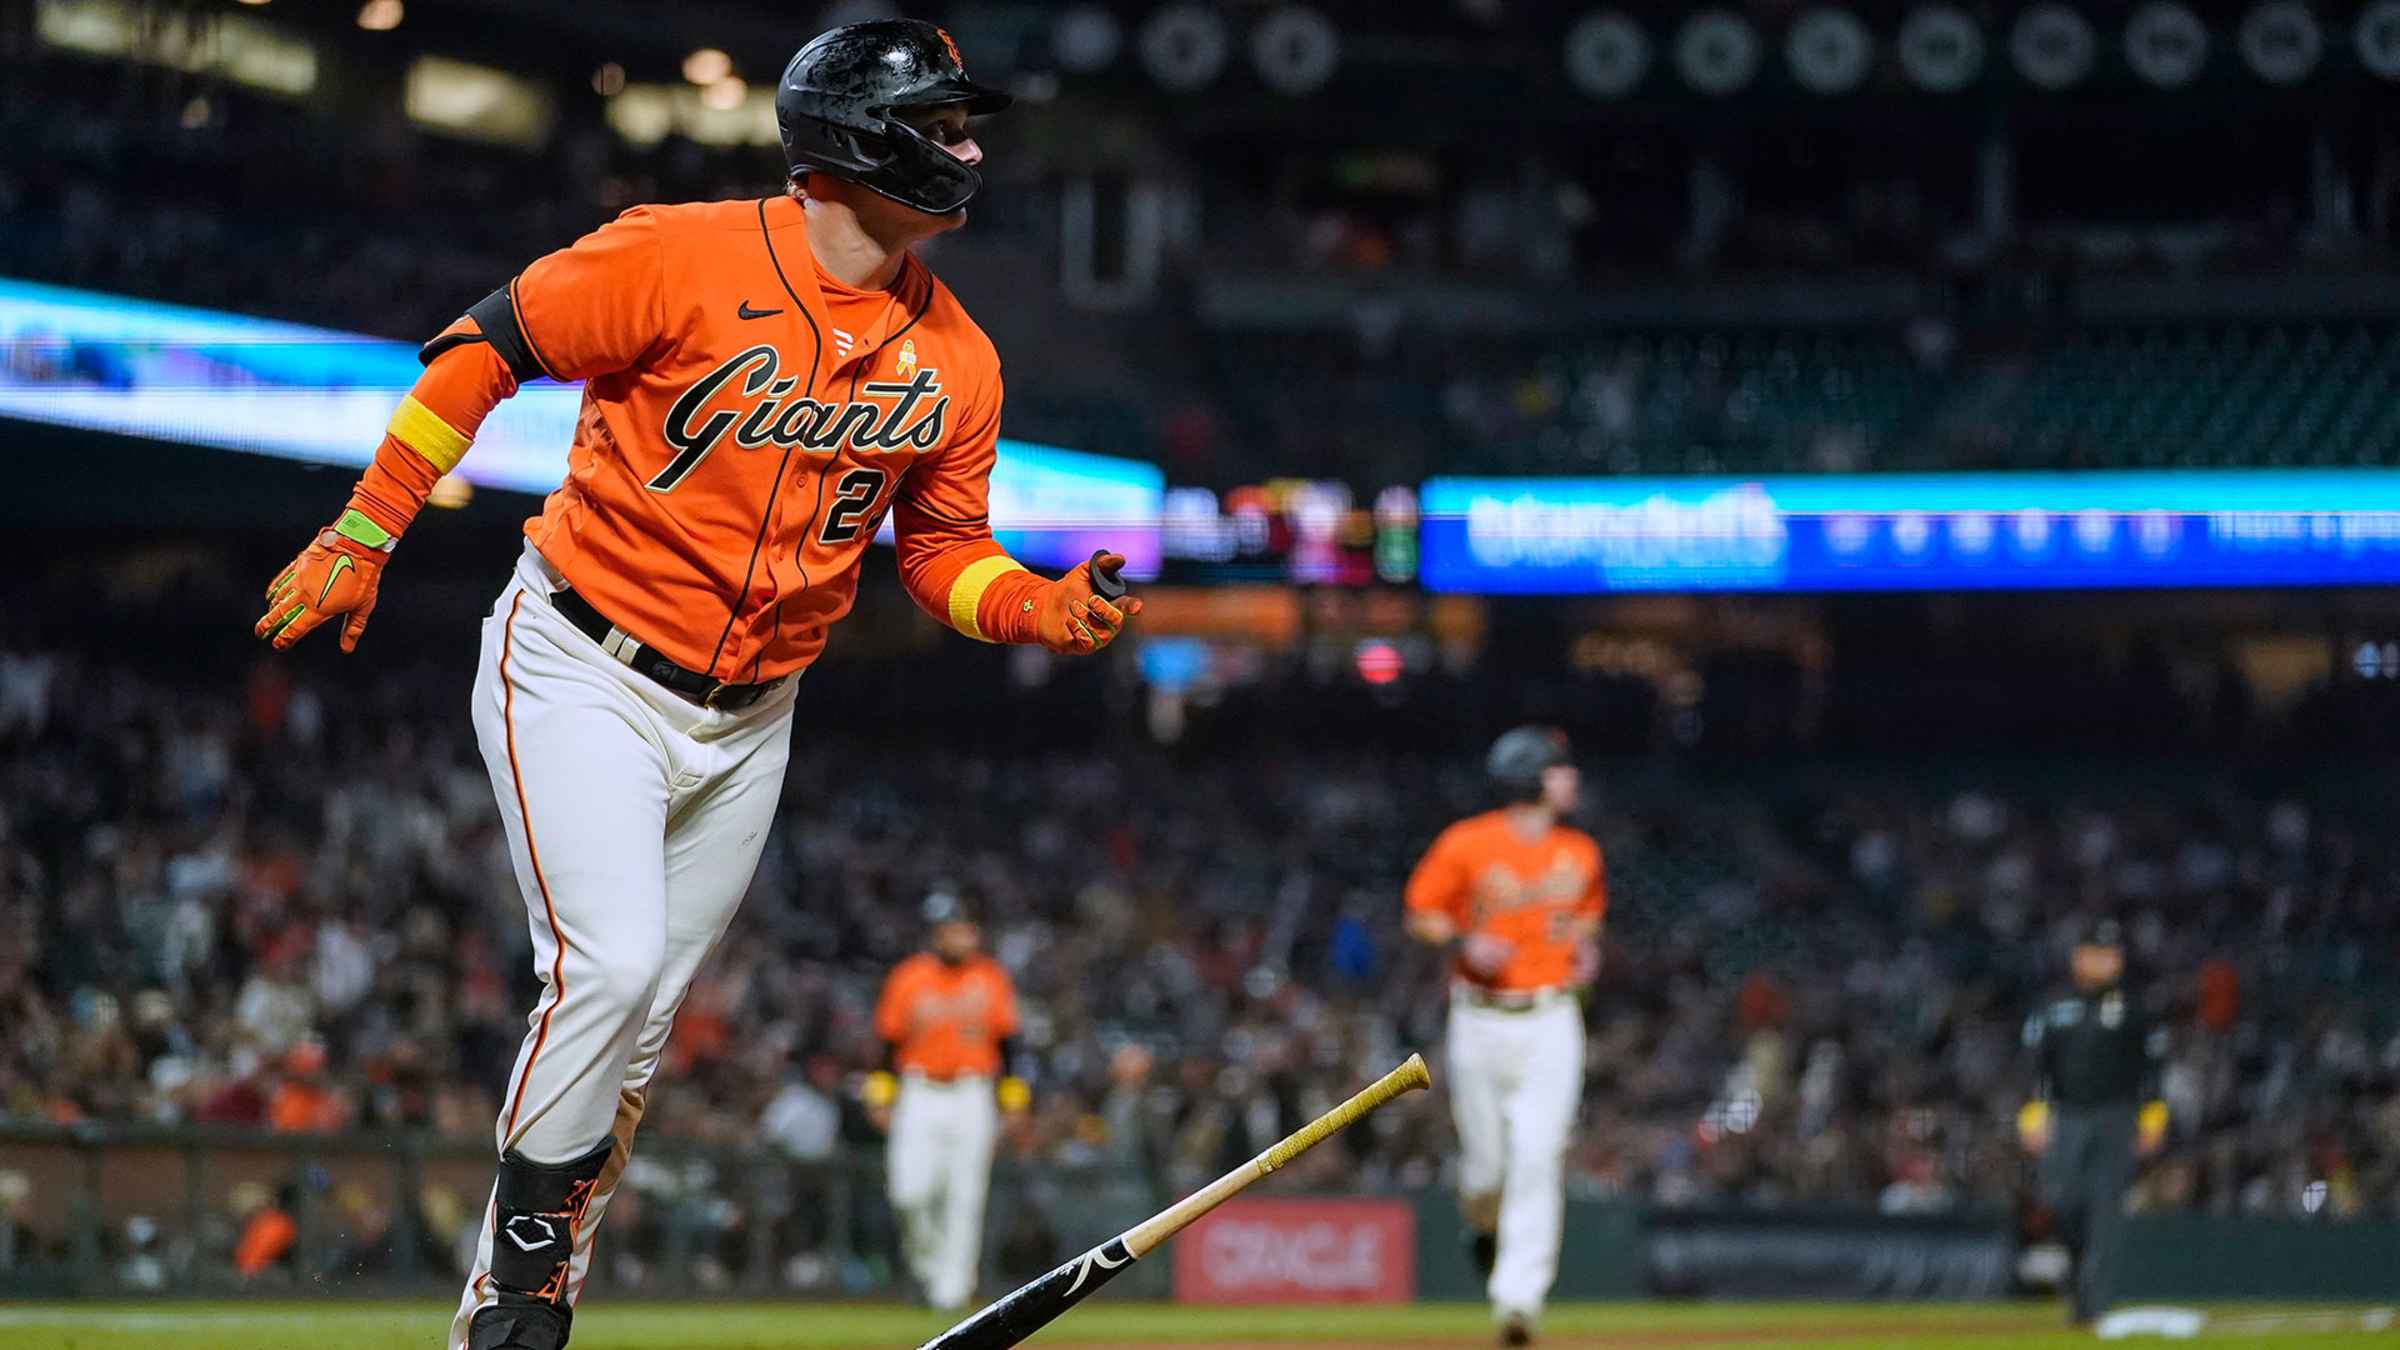 Giants erupt for 5 runs in the 10th to down Pirates